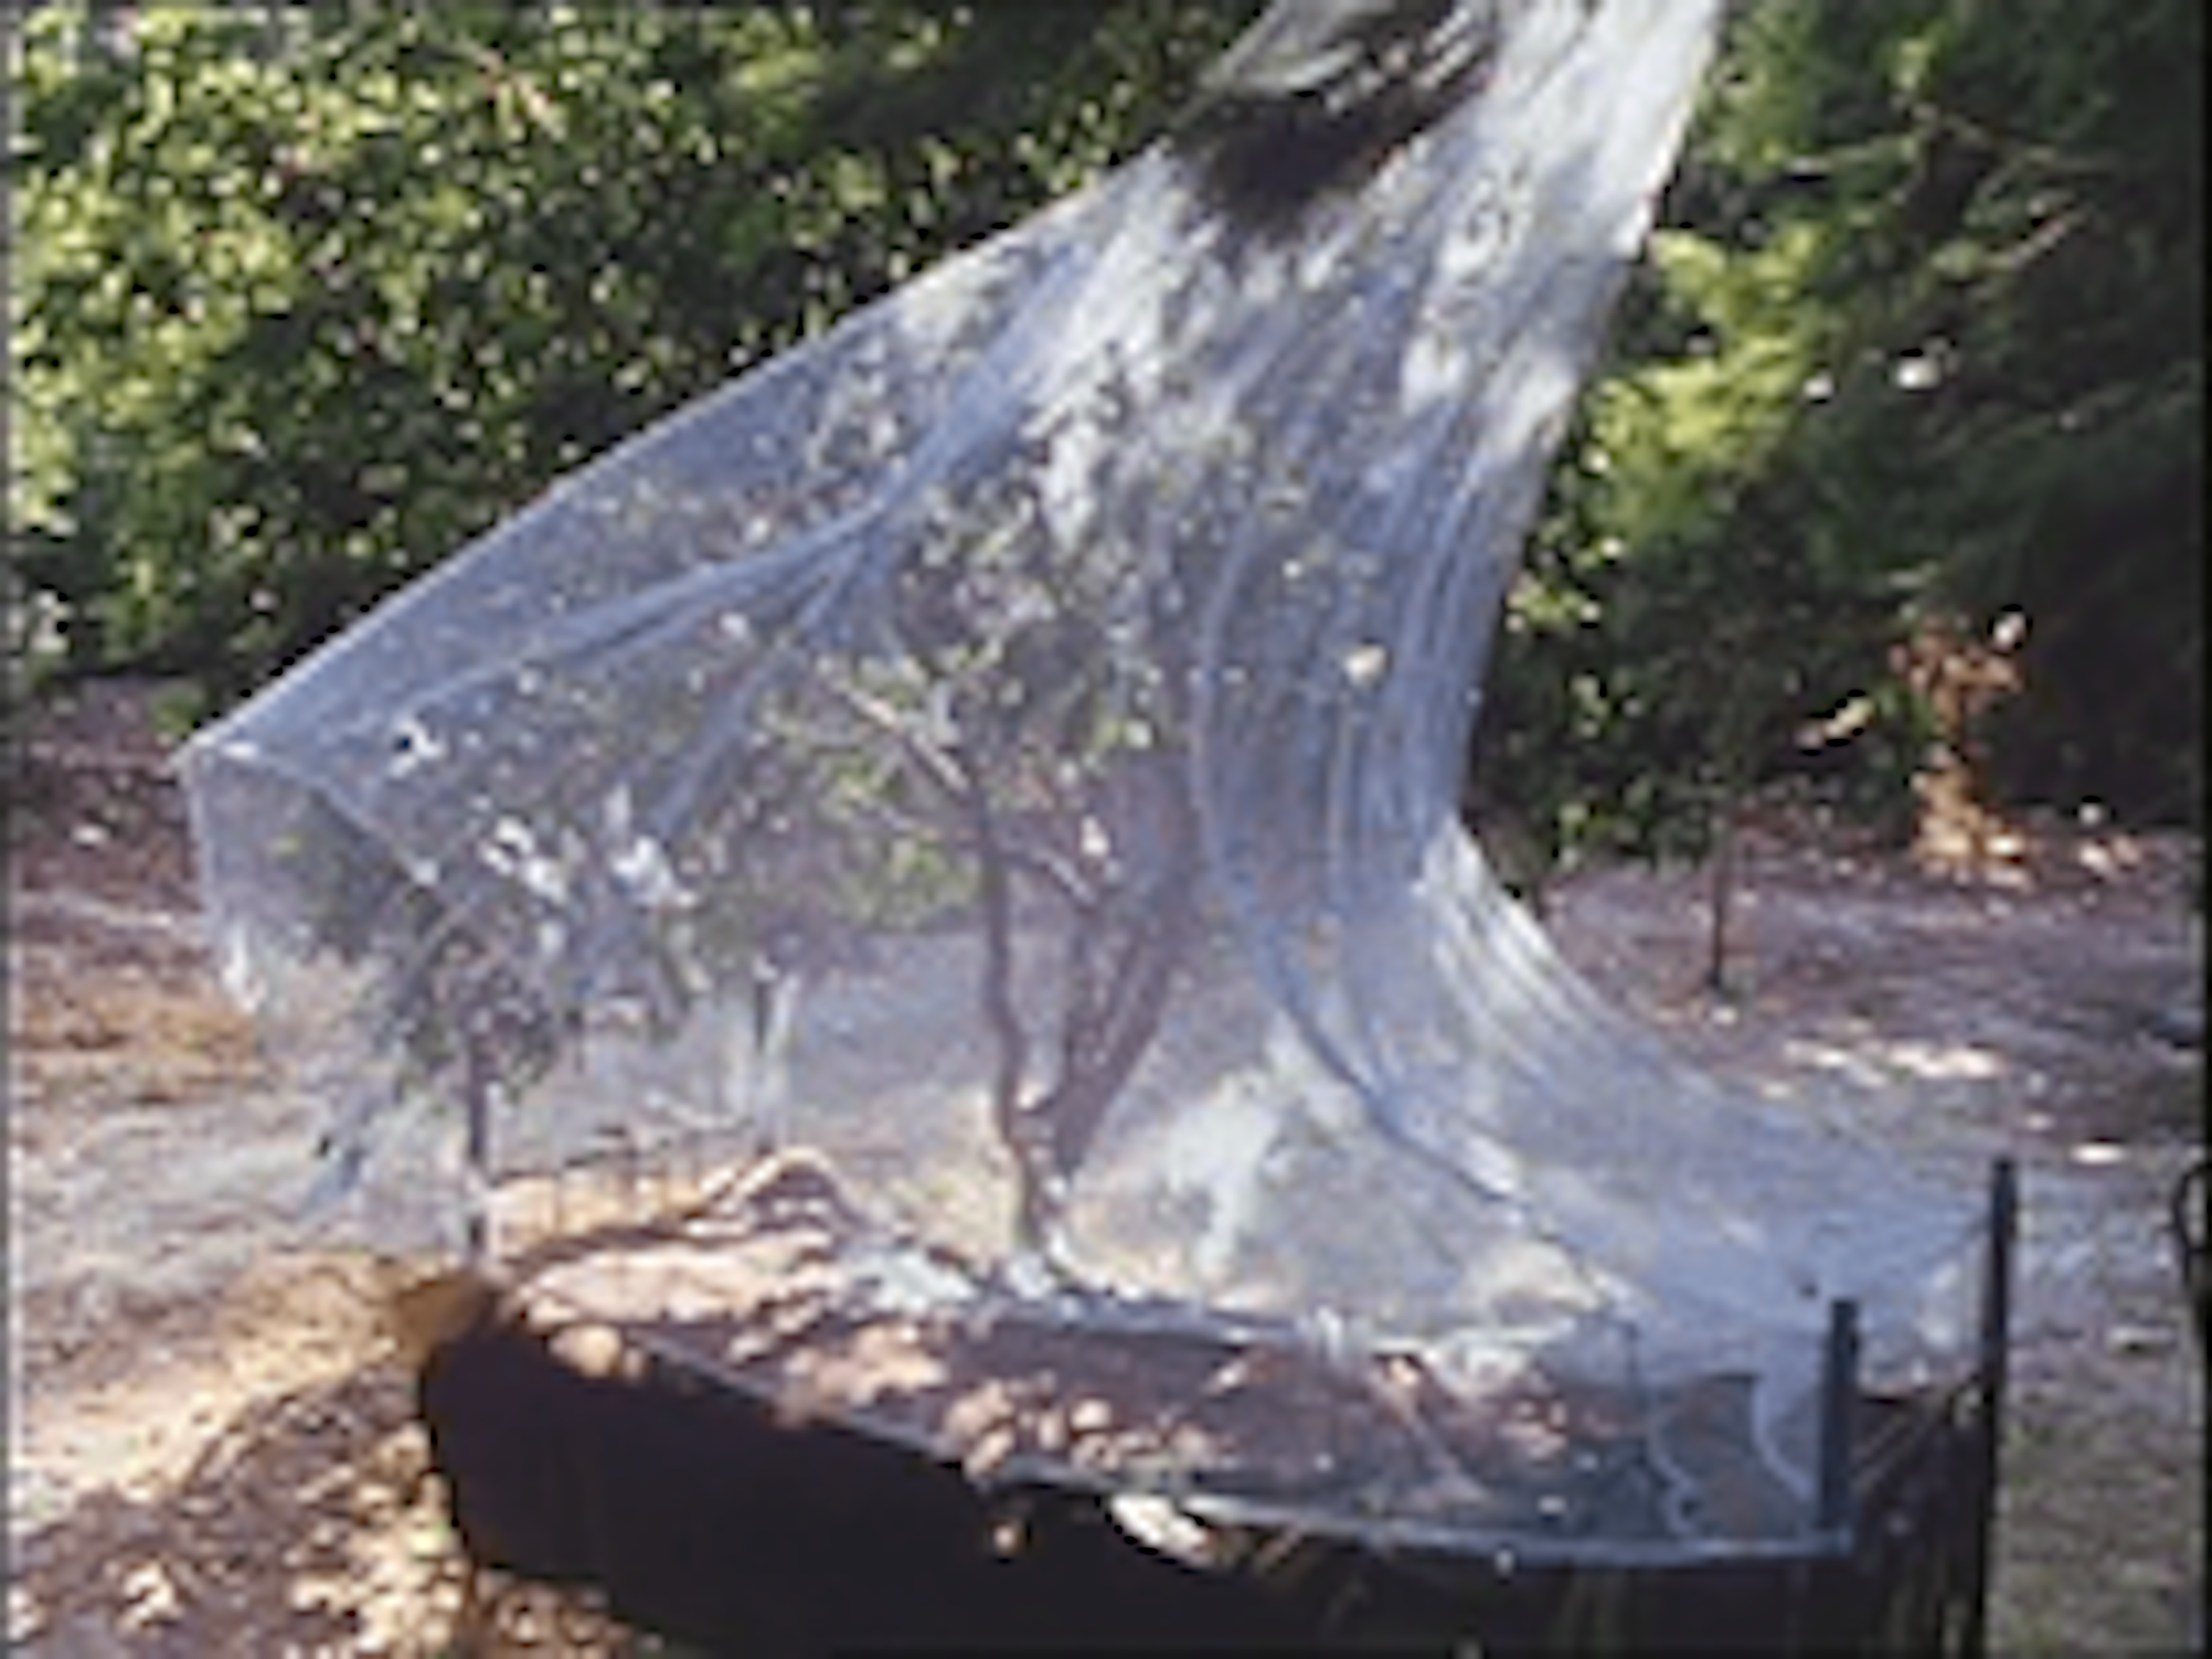 A twin-sized bed set outdoors set on sand and gravel. There are trees surrounding the bed which has a large bug’s net draped over the bed, swaying from a slight breeze. 